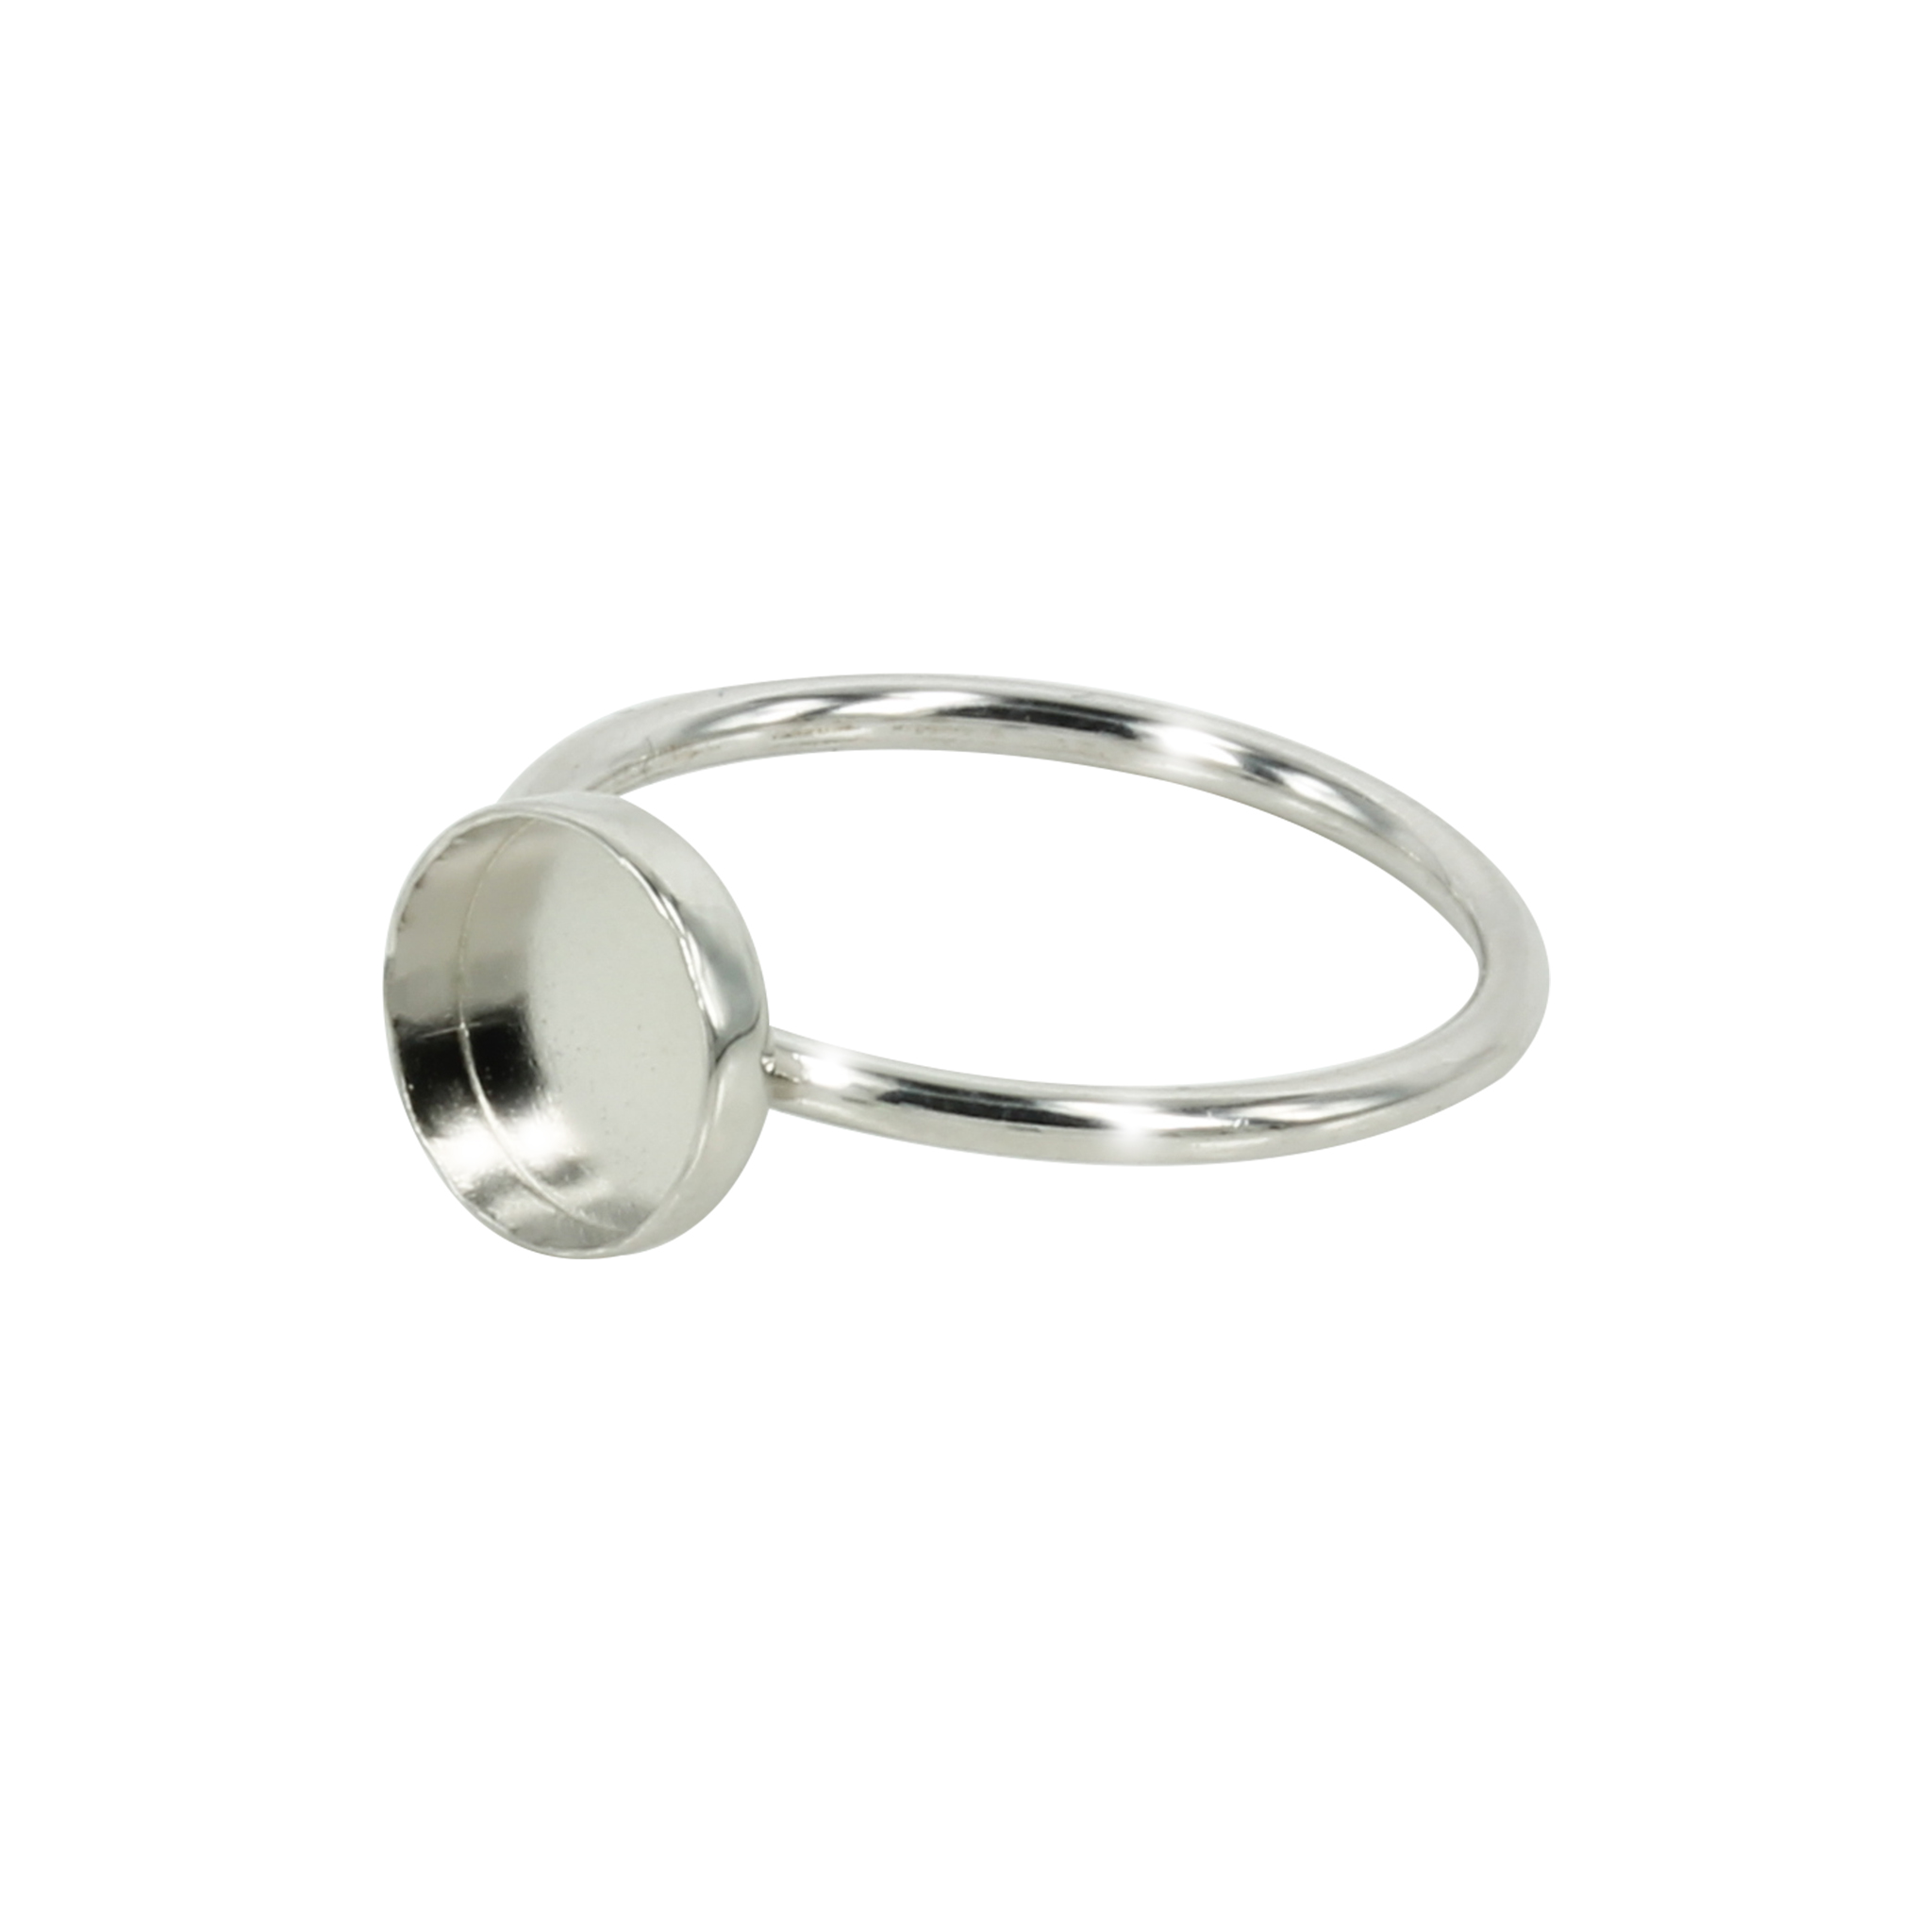 Ring Blanks Jewelry Making, Ring Settings Blank Silver 925